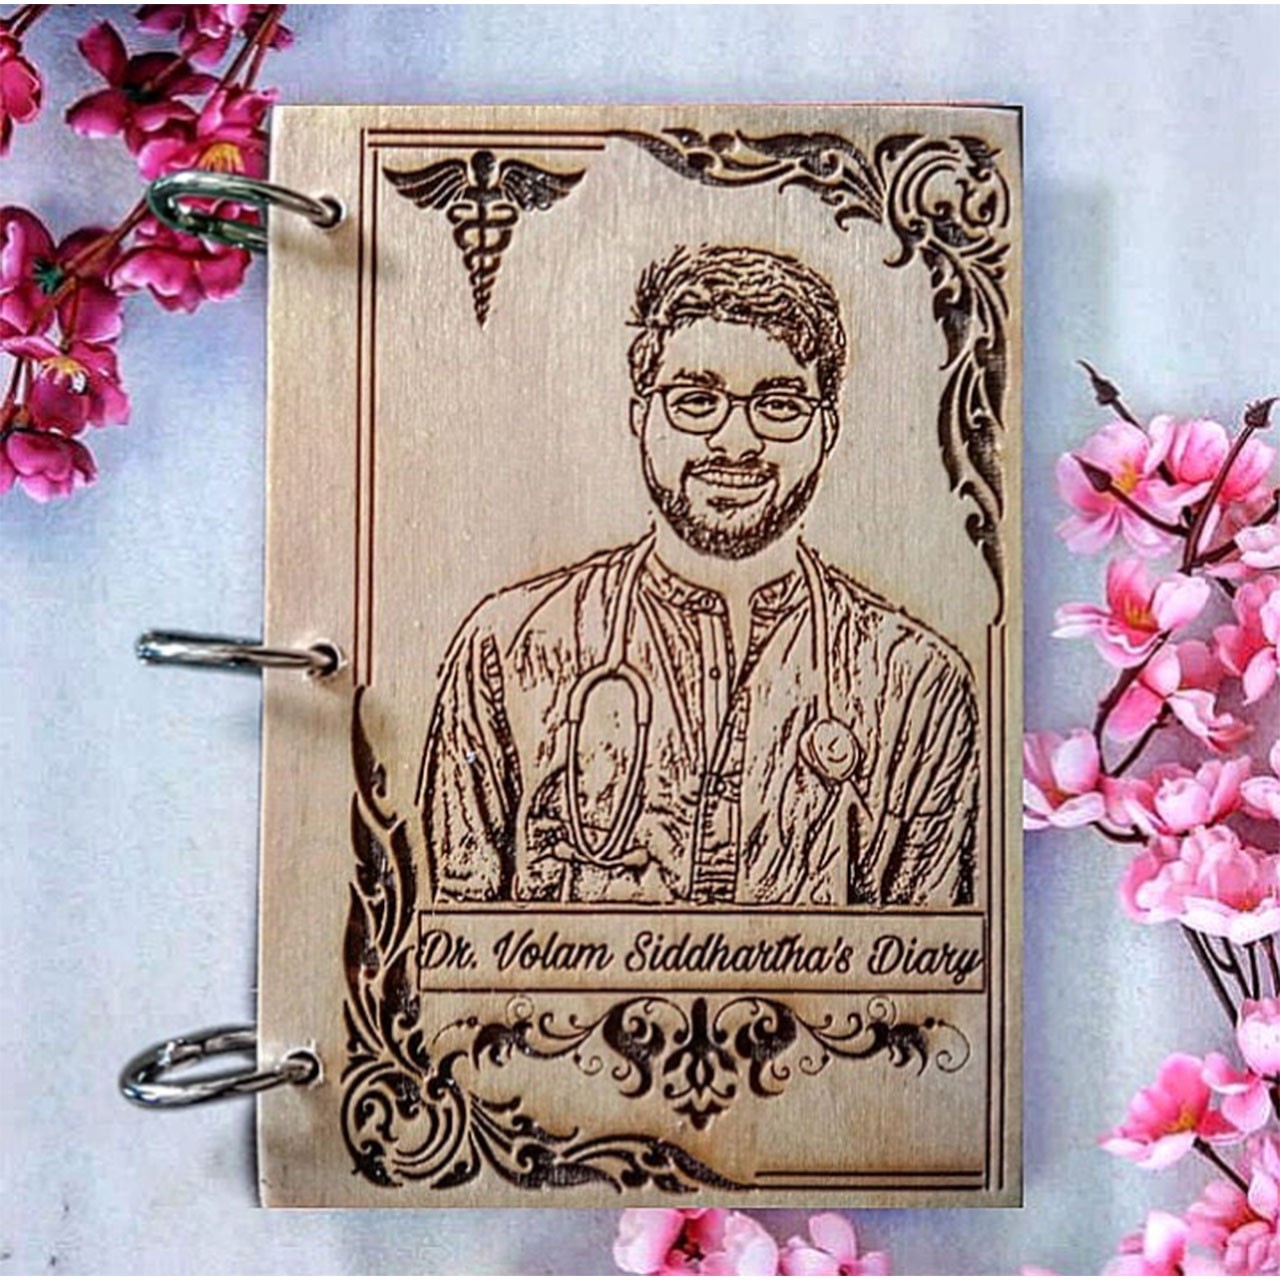 Homafy Sketch Birthday Photo Wooden Frame (11x8 Inches) | Table Tops |  Birthday Gifts For Him, Her | Best Birthday Gift For Husband, Wife, Bf, Gf  : Amazon.in: Home & Kitchen